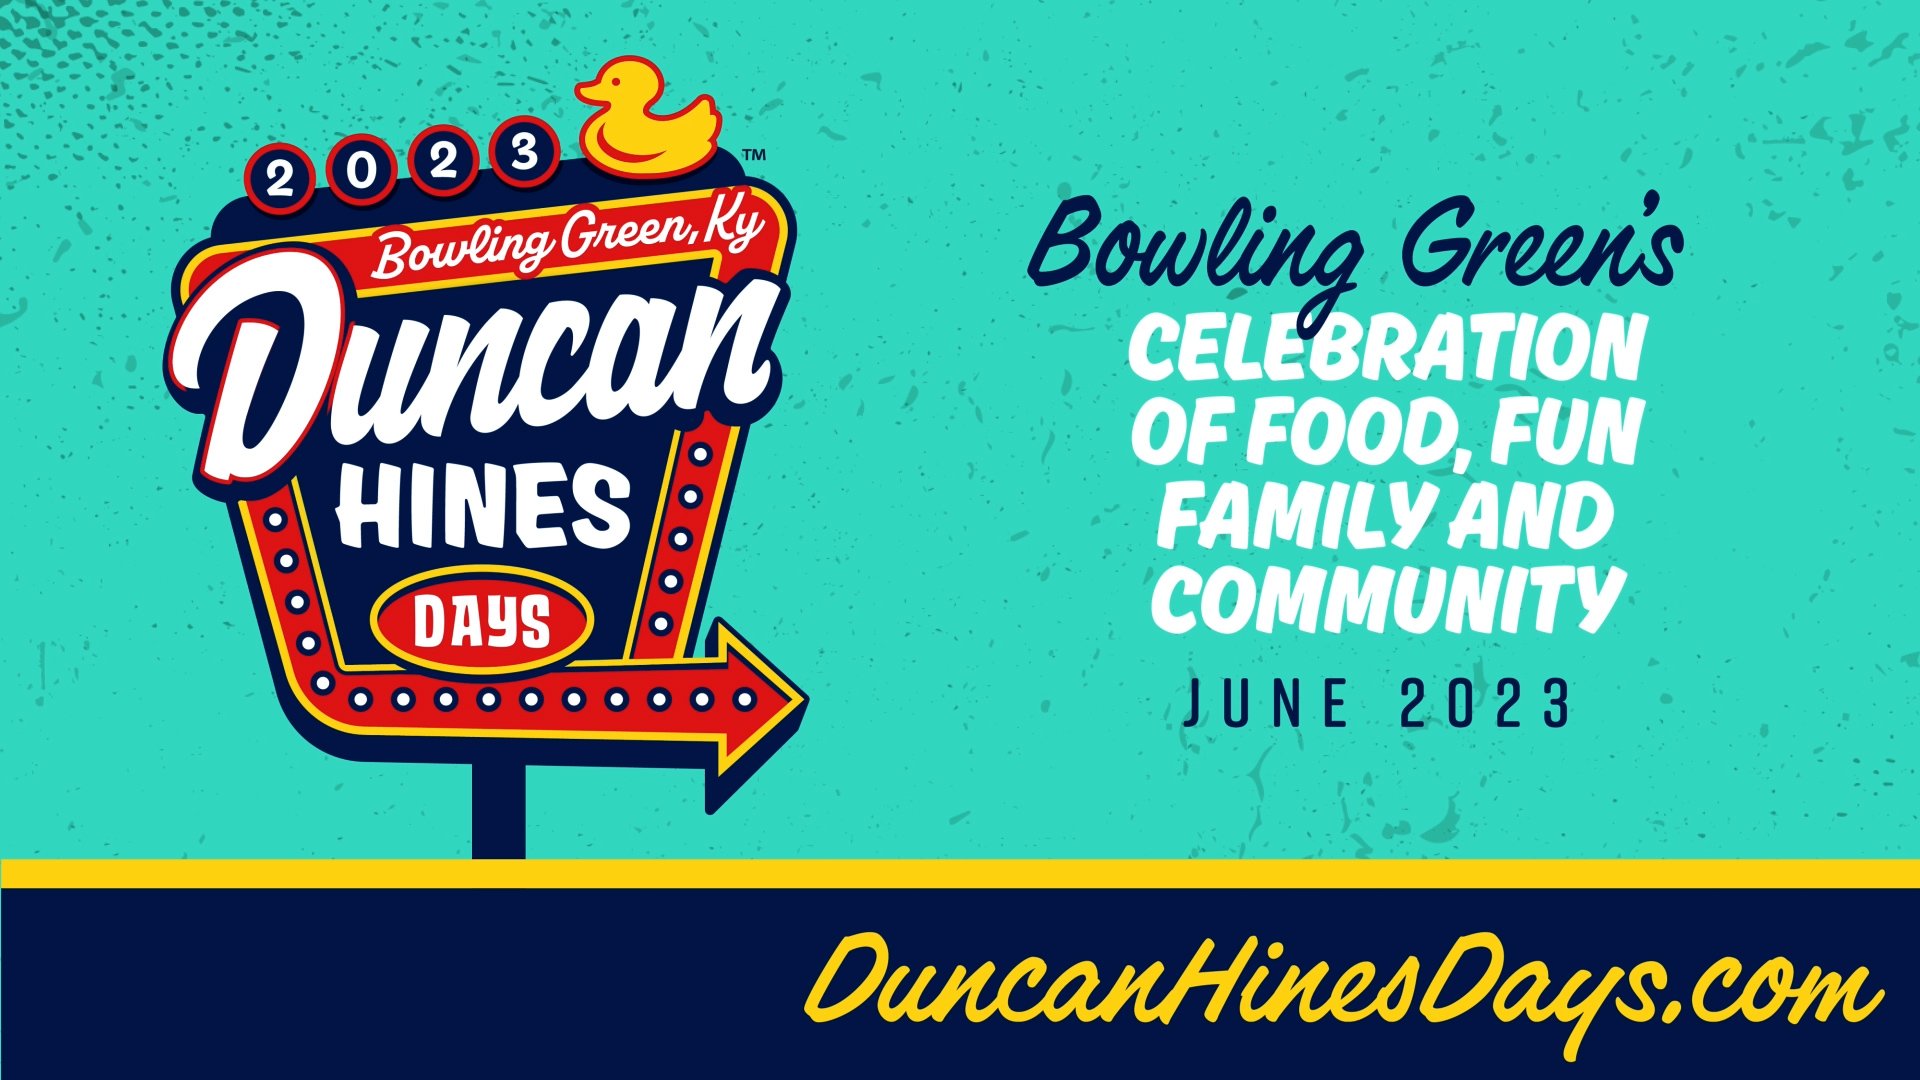 Duncan Hines Days to serve up celebration in downtown Bowling Green